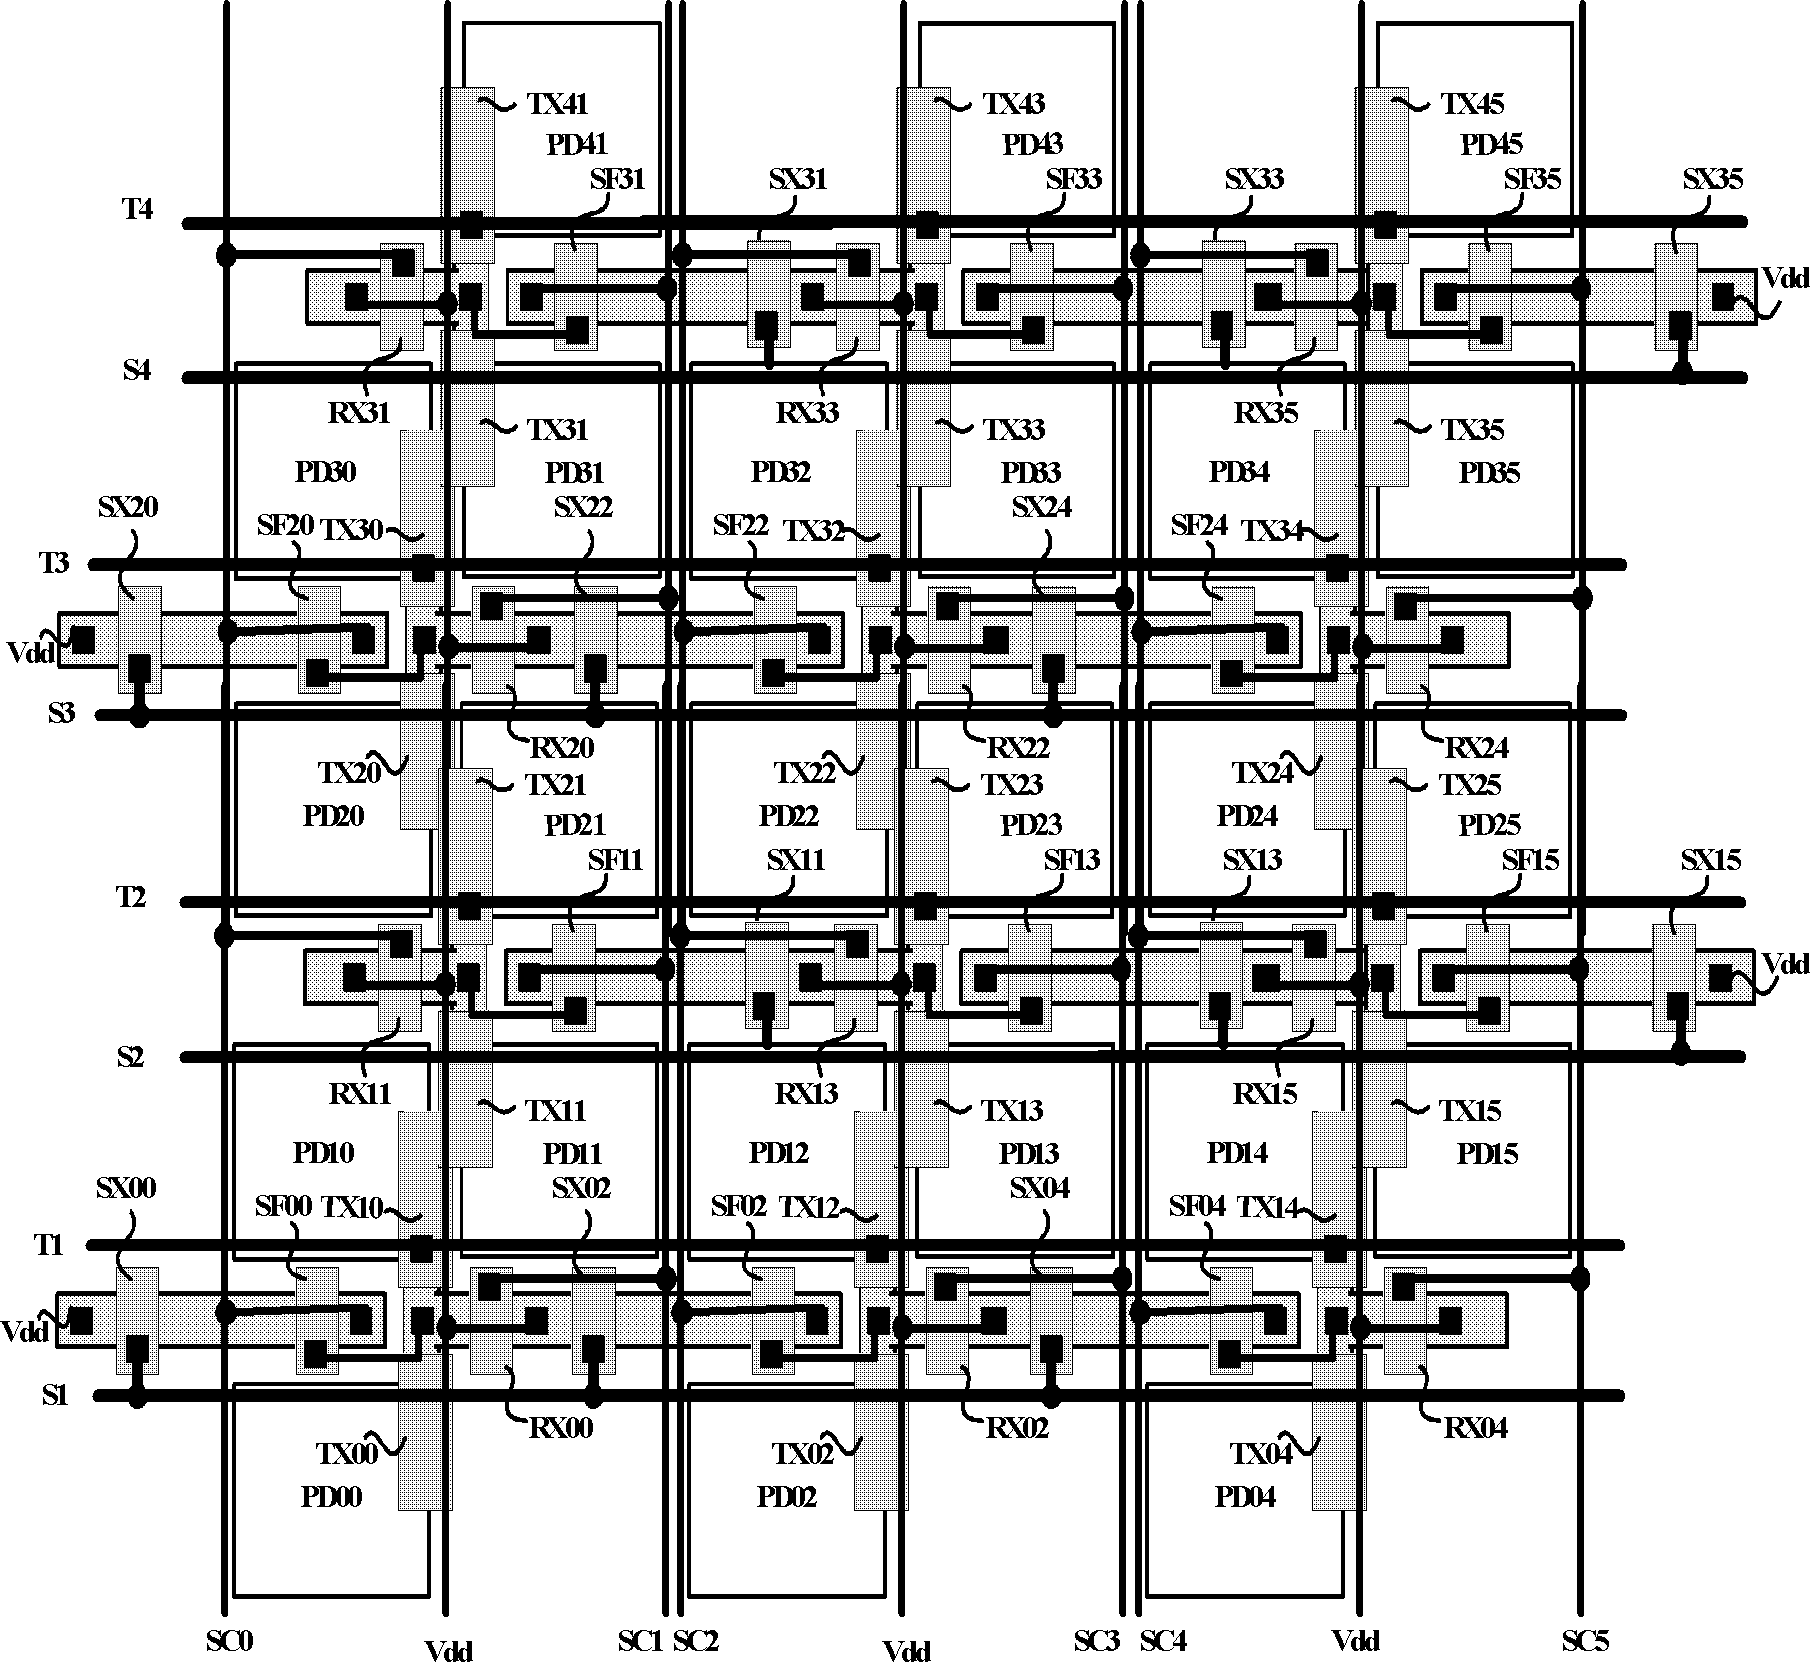 CMOS (complementary metal-oxide-semiconductor transistor) image sensor pixel and control time sequence thereof